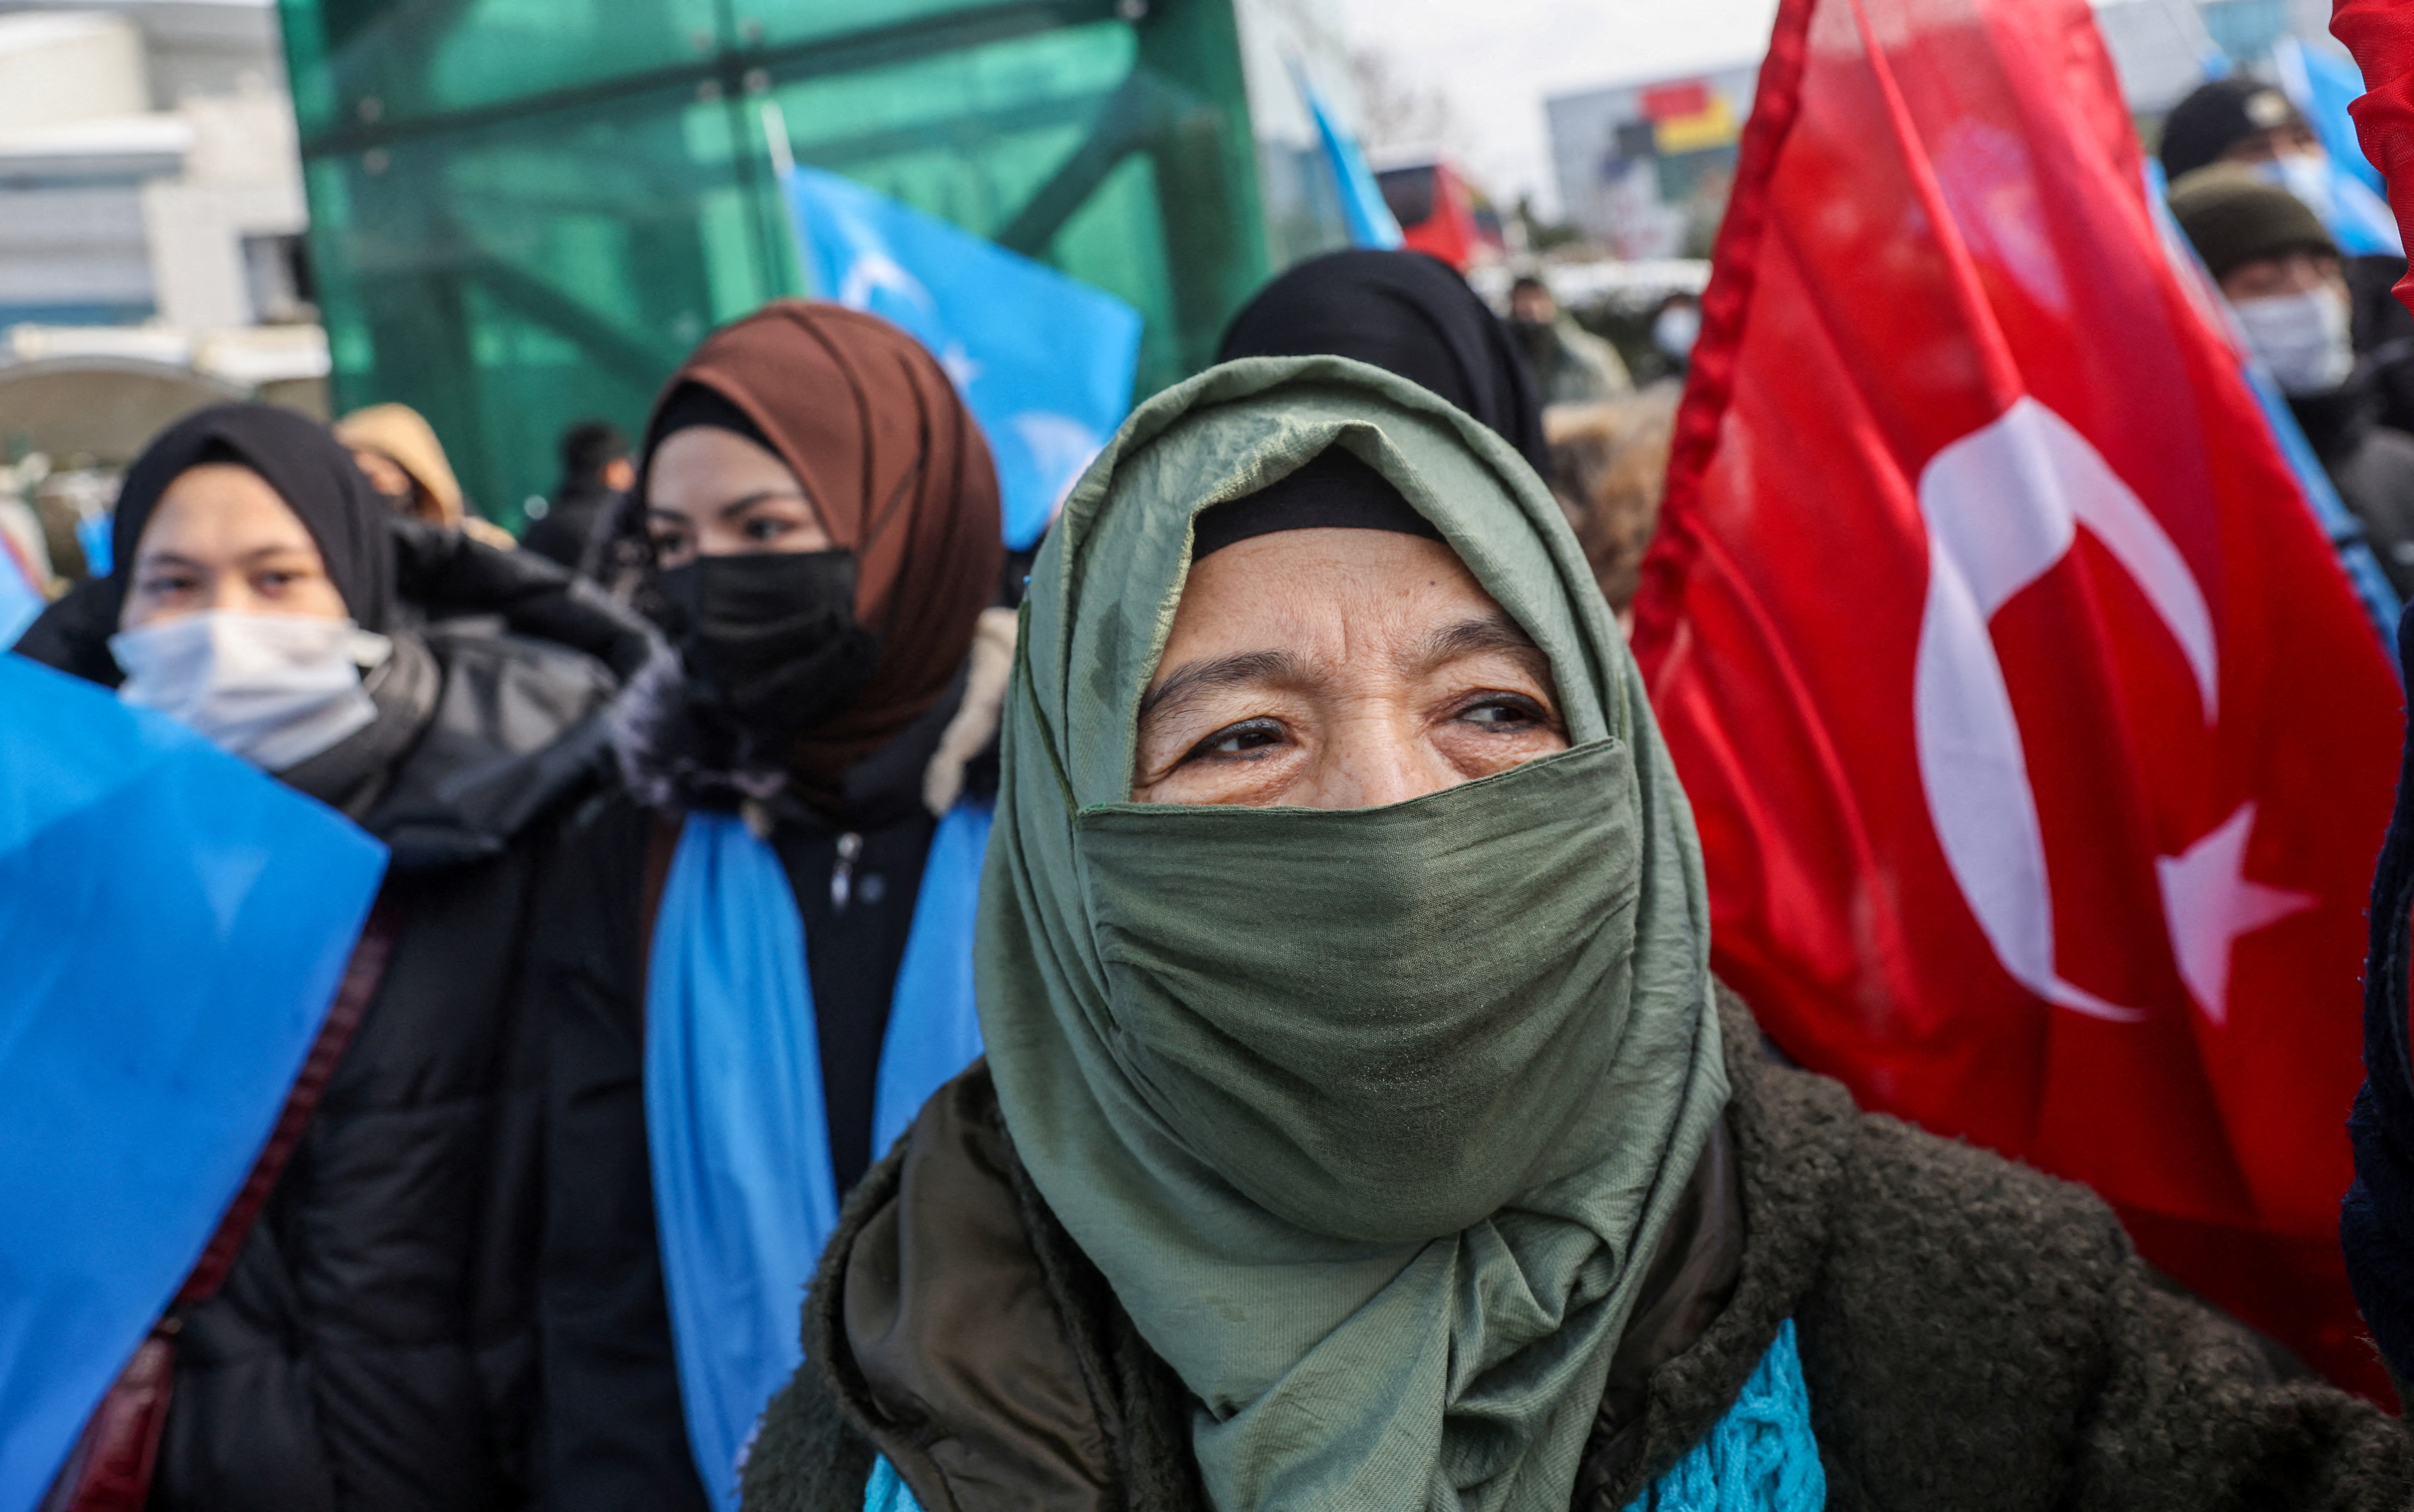 People from China's Uyghur Muslim ethnic group protest outside the city's Turkish Olympic Committee building in Istanbul